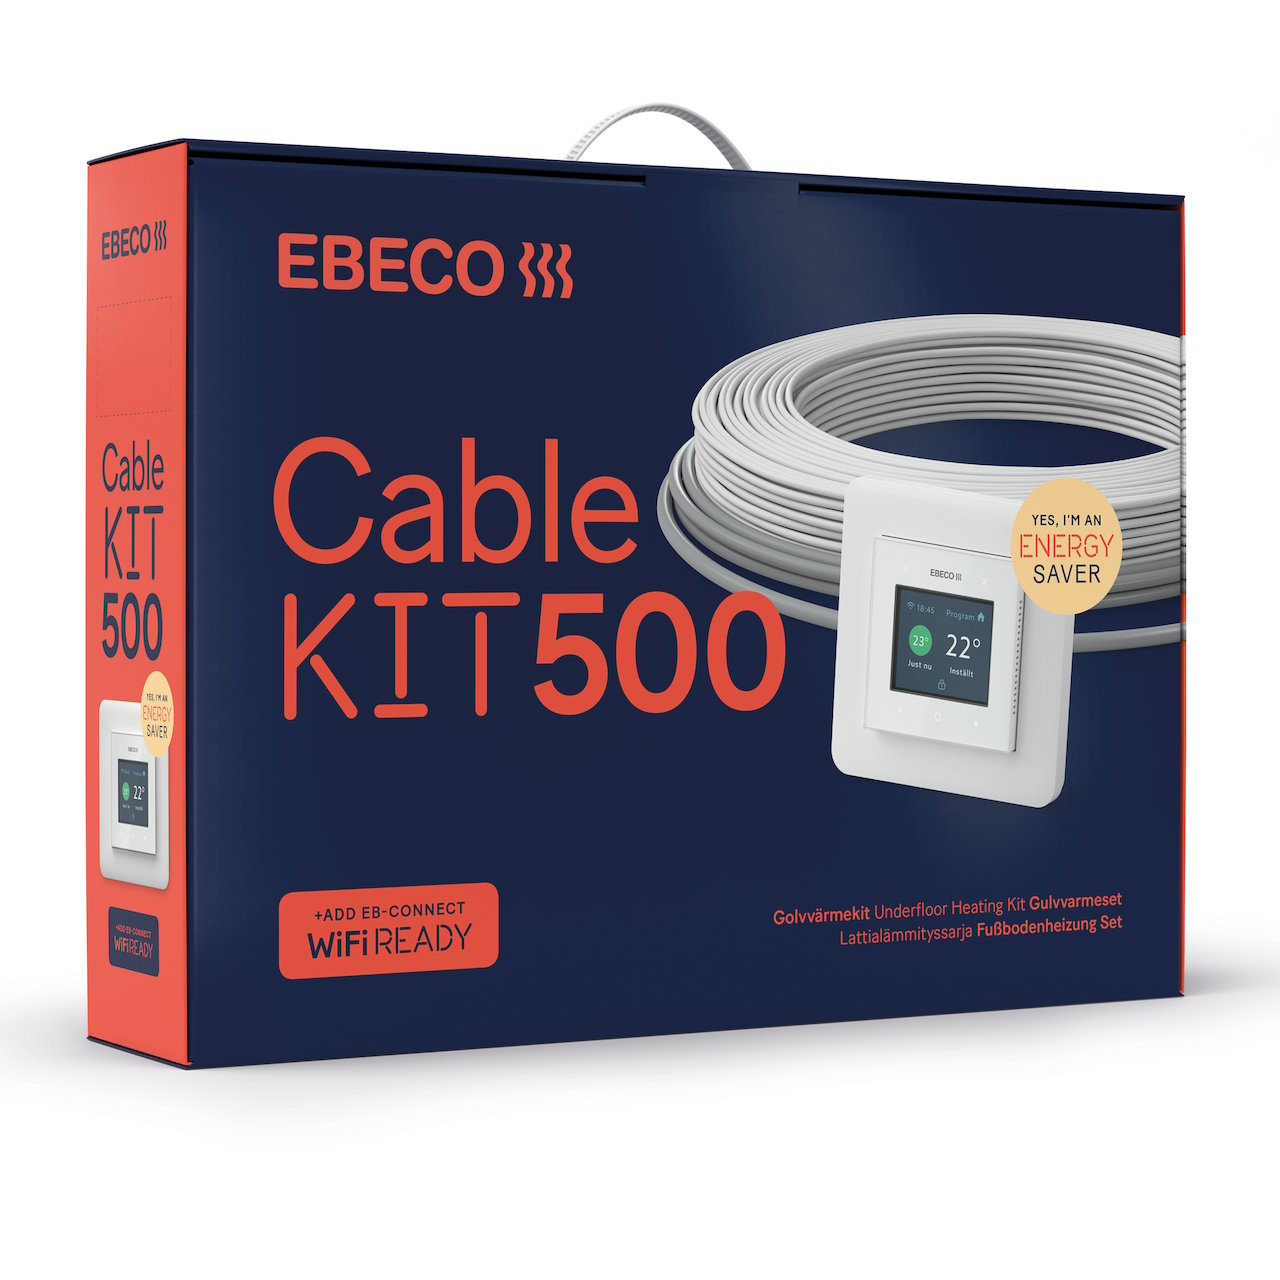 EBECO CABLE KIT 500 23M 260W